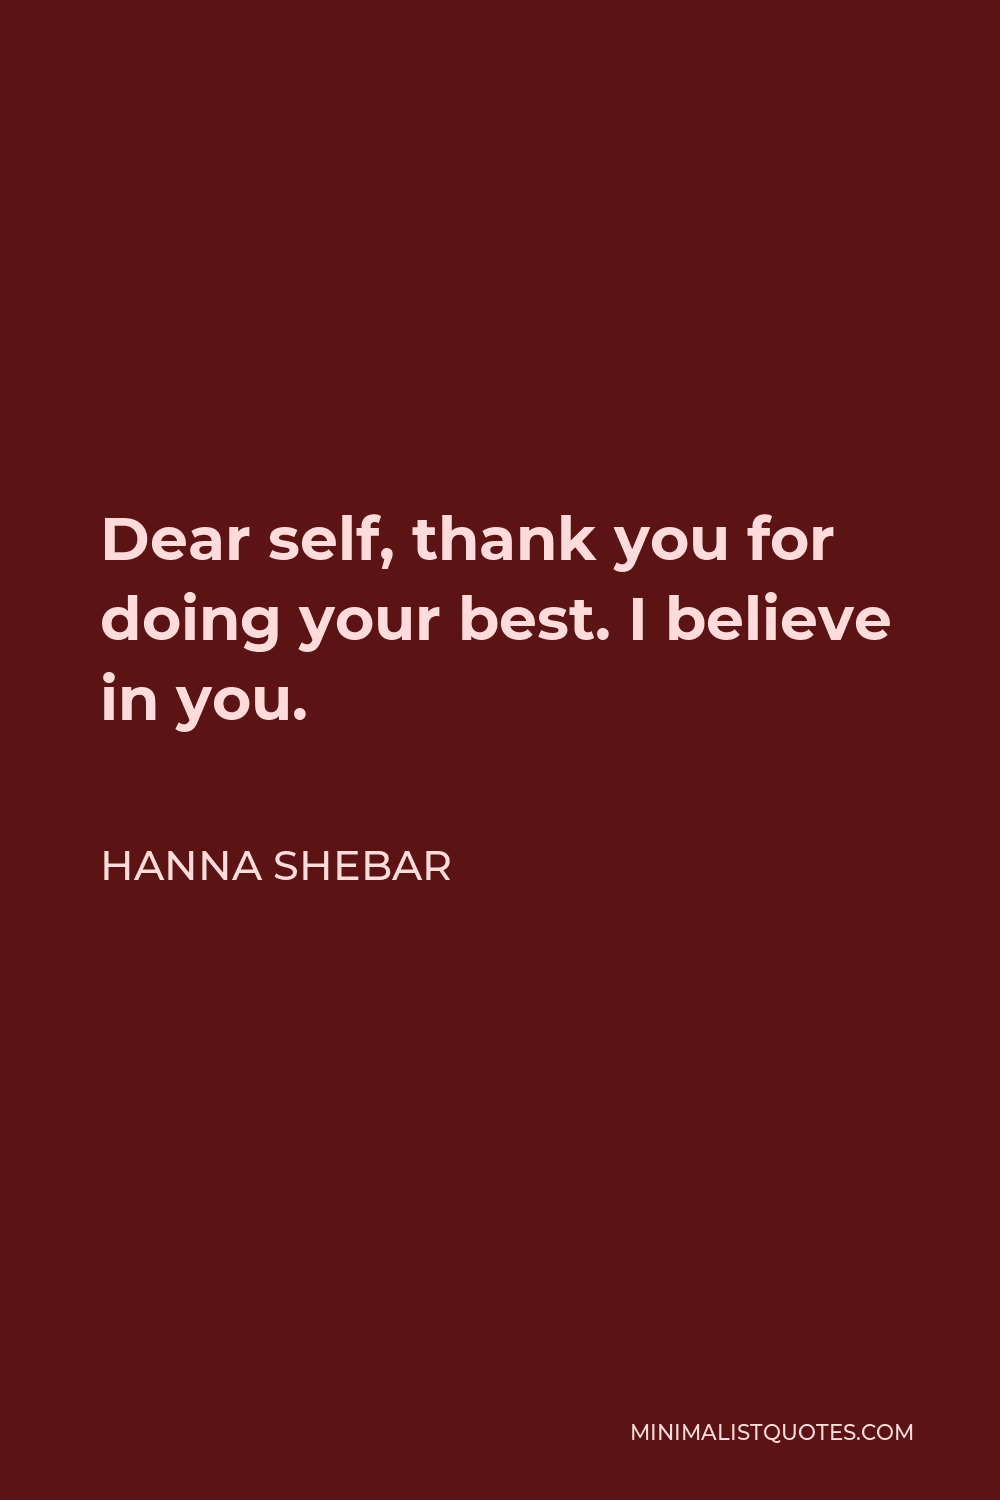 Hanna Shebar Quote: Dear self, thank you for doing your best. I ...